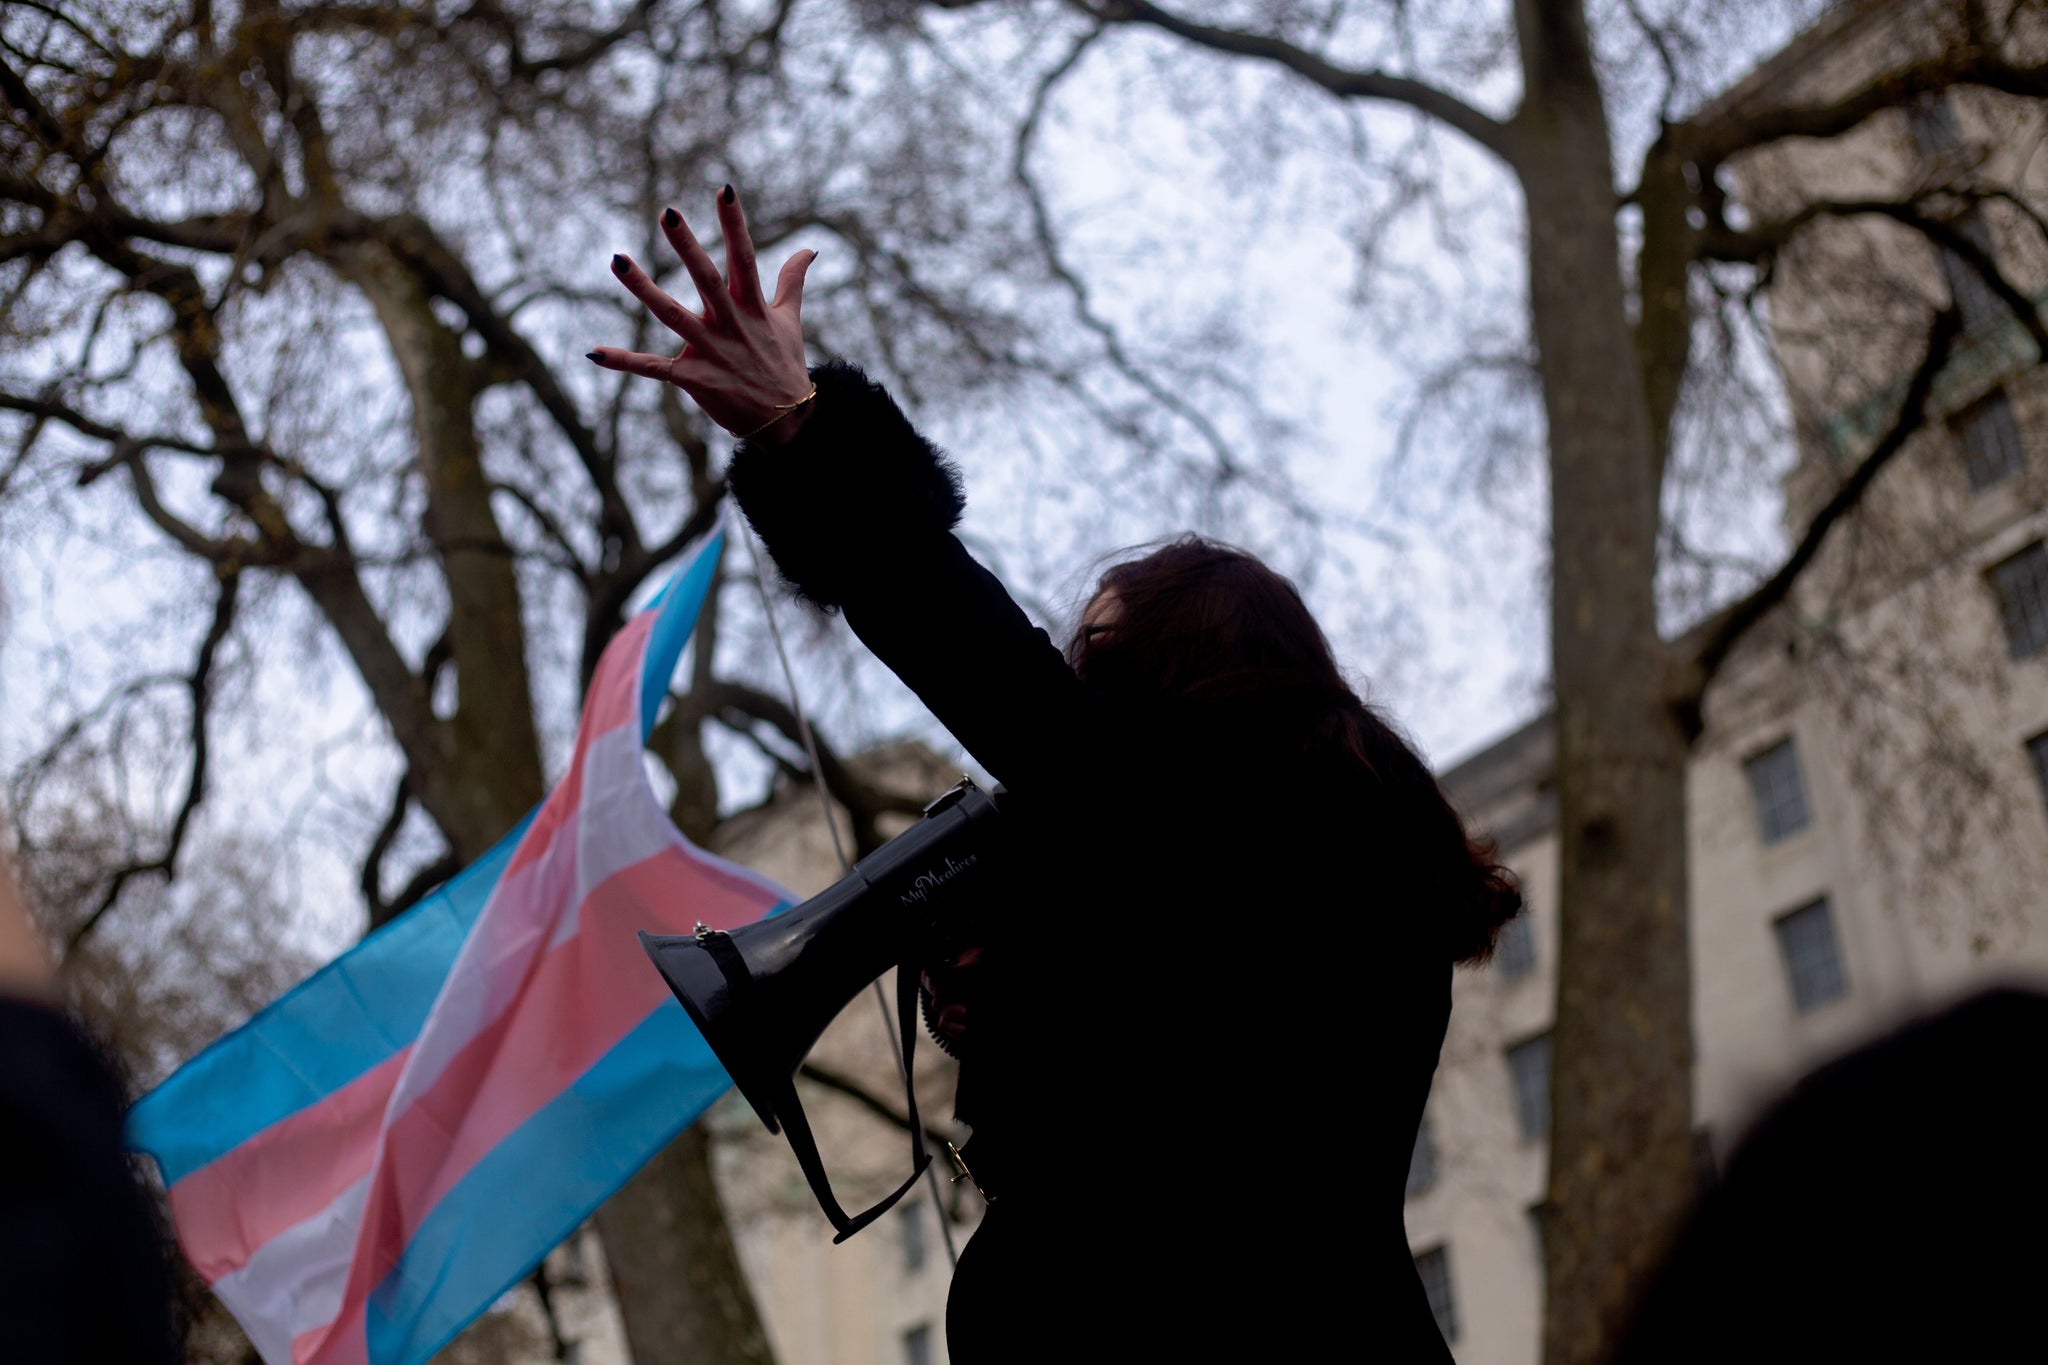 Activist with a megaphone at The Trans Rights Protest London, April 2022 - Photo by Karollyne Hubert